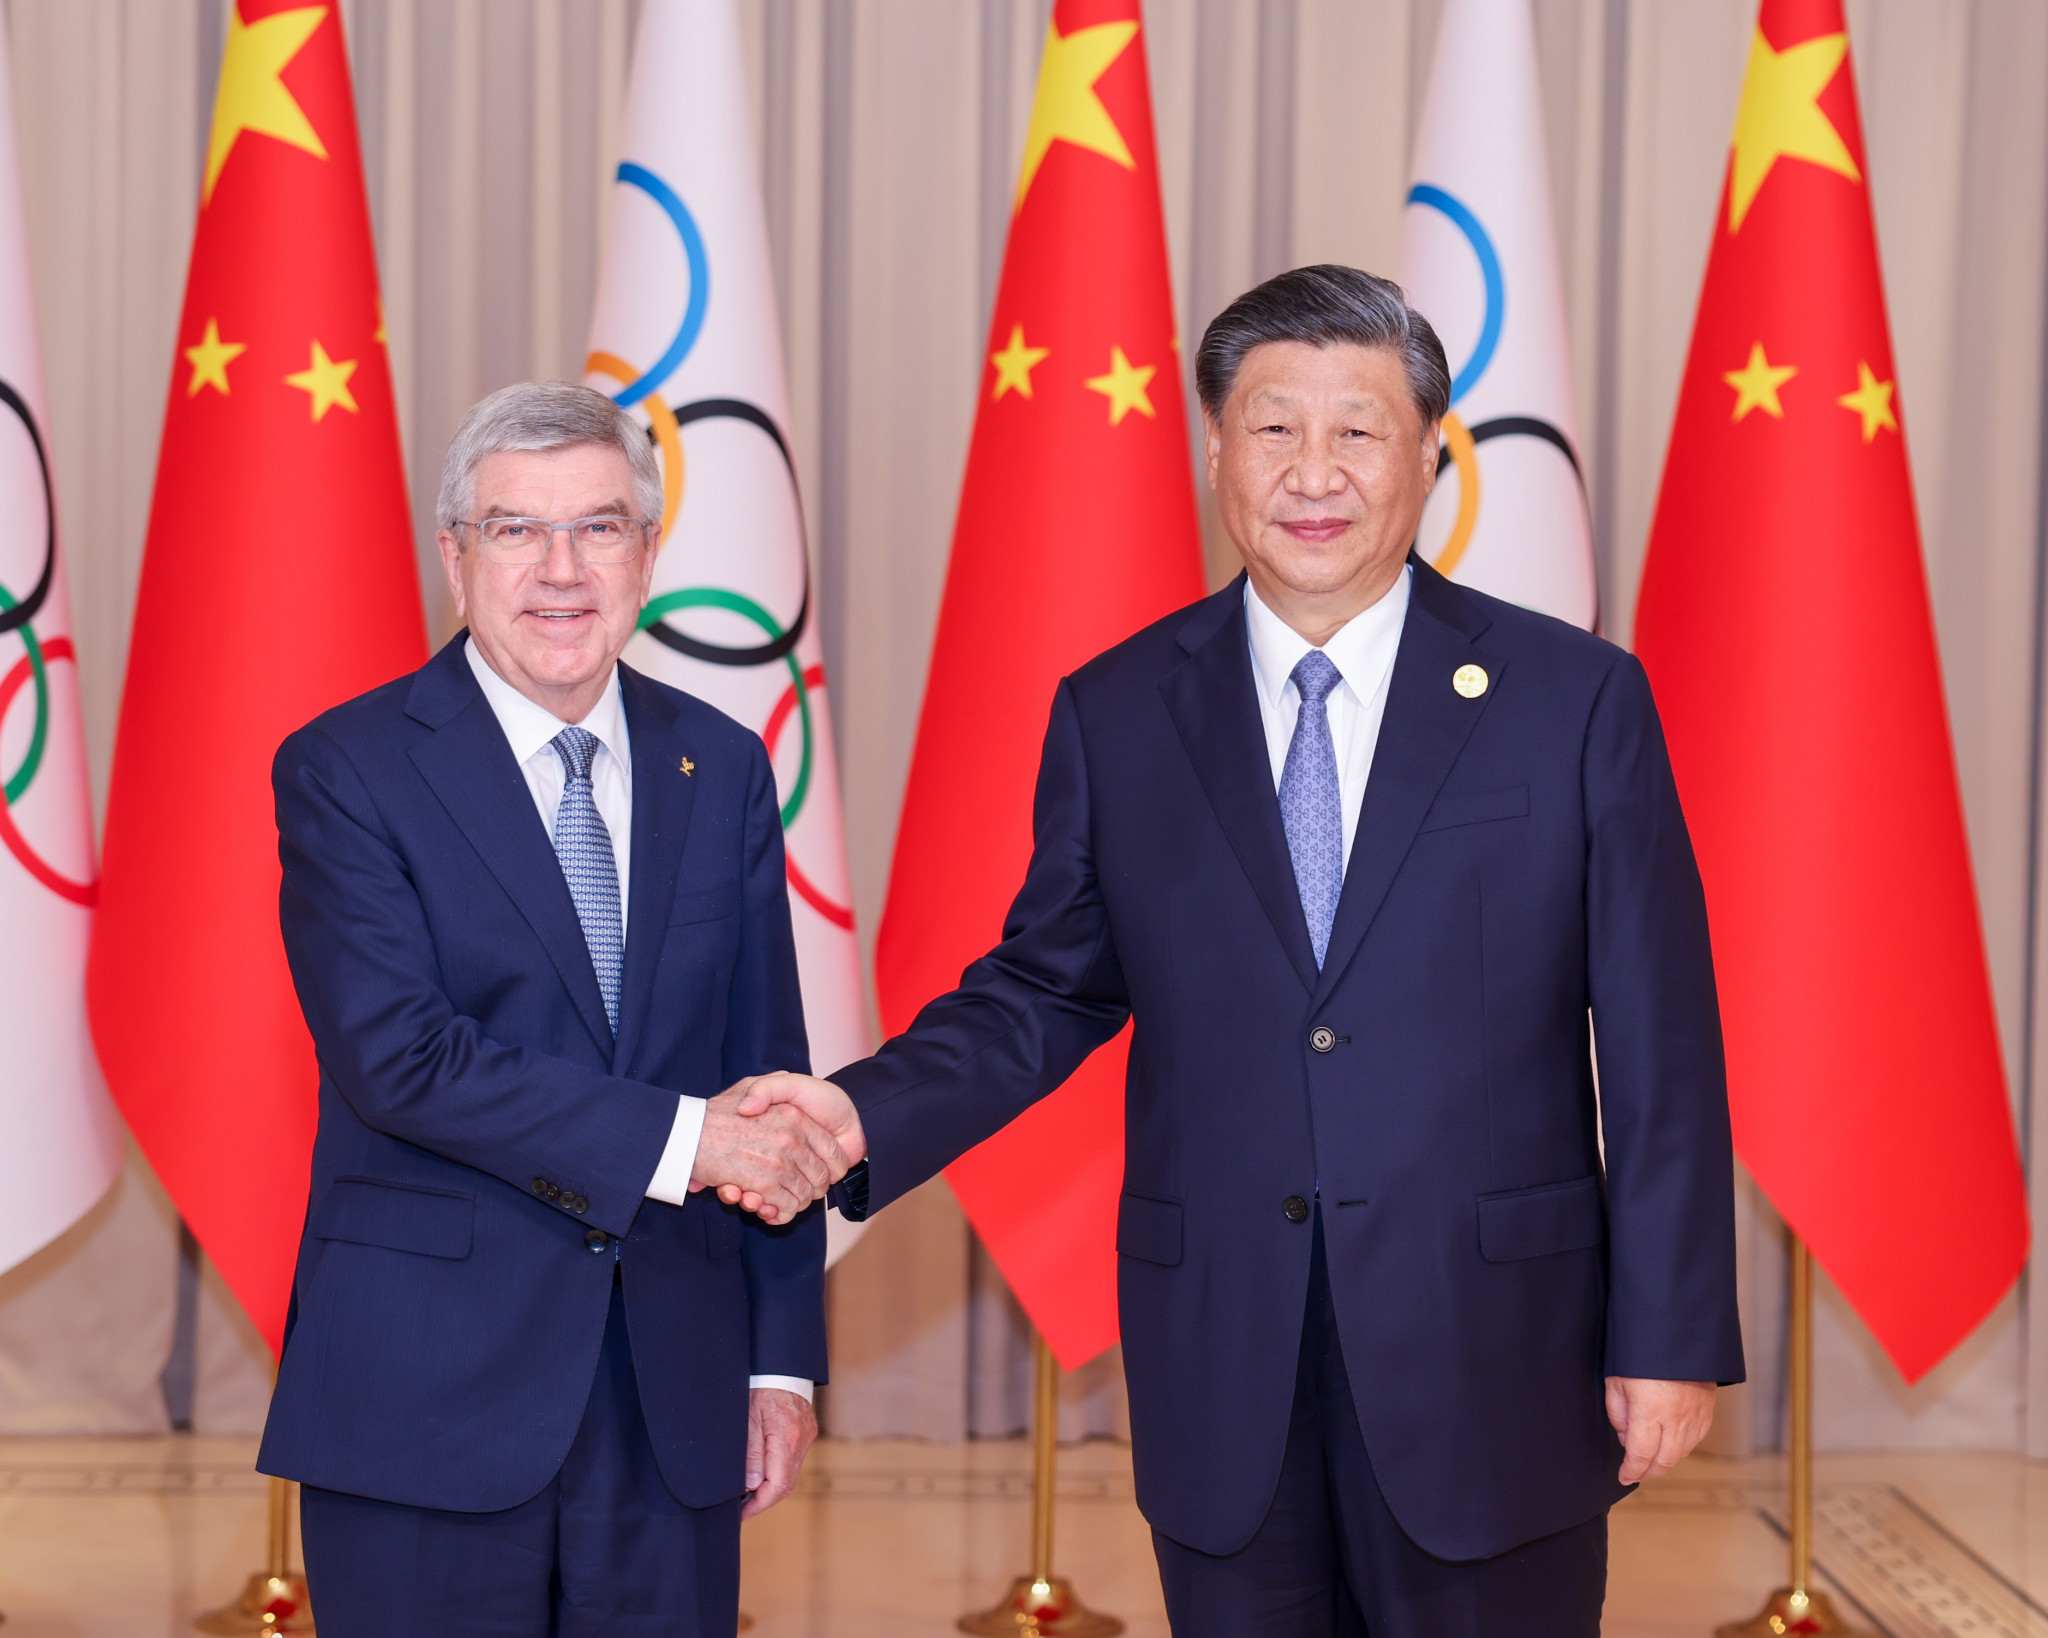 IOC President Thomas Bach, left, met Chinese leader Xi Jinping in Hangzhou ©Chinese Foreign Ministry